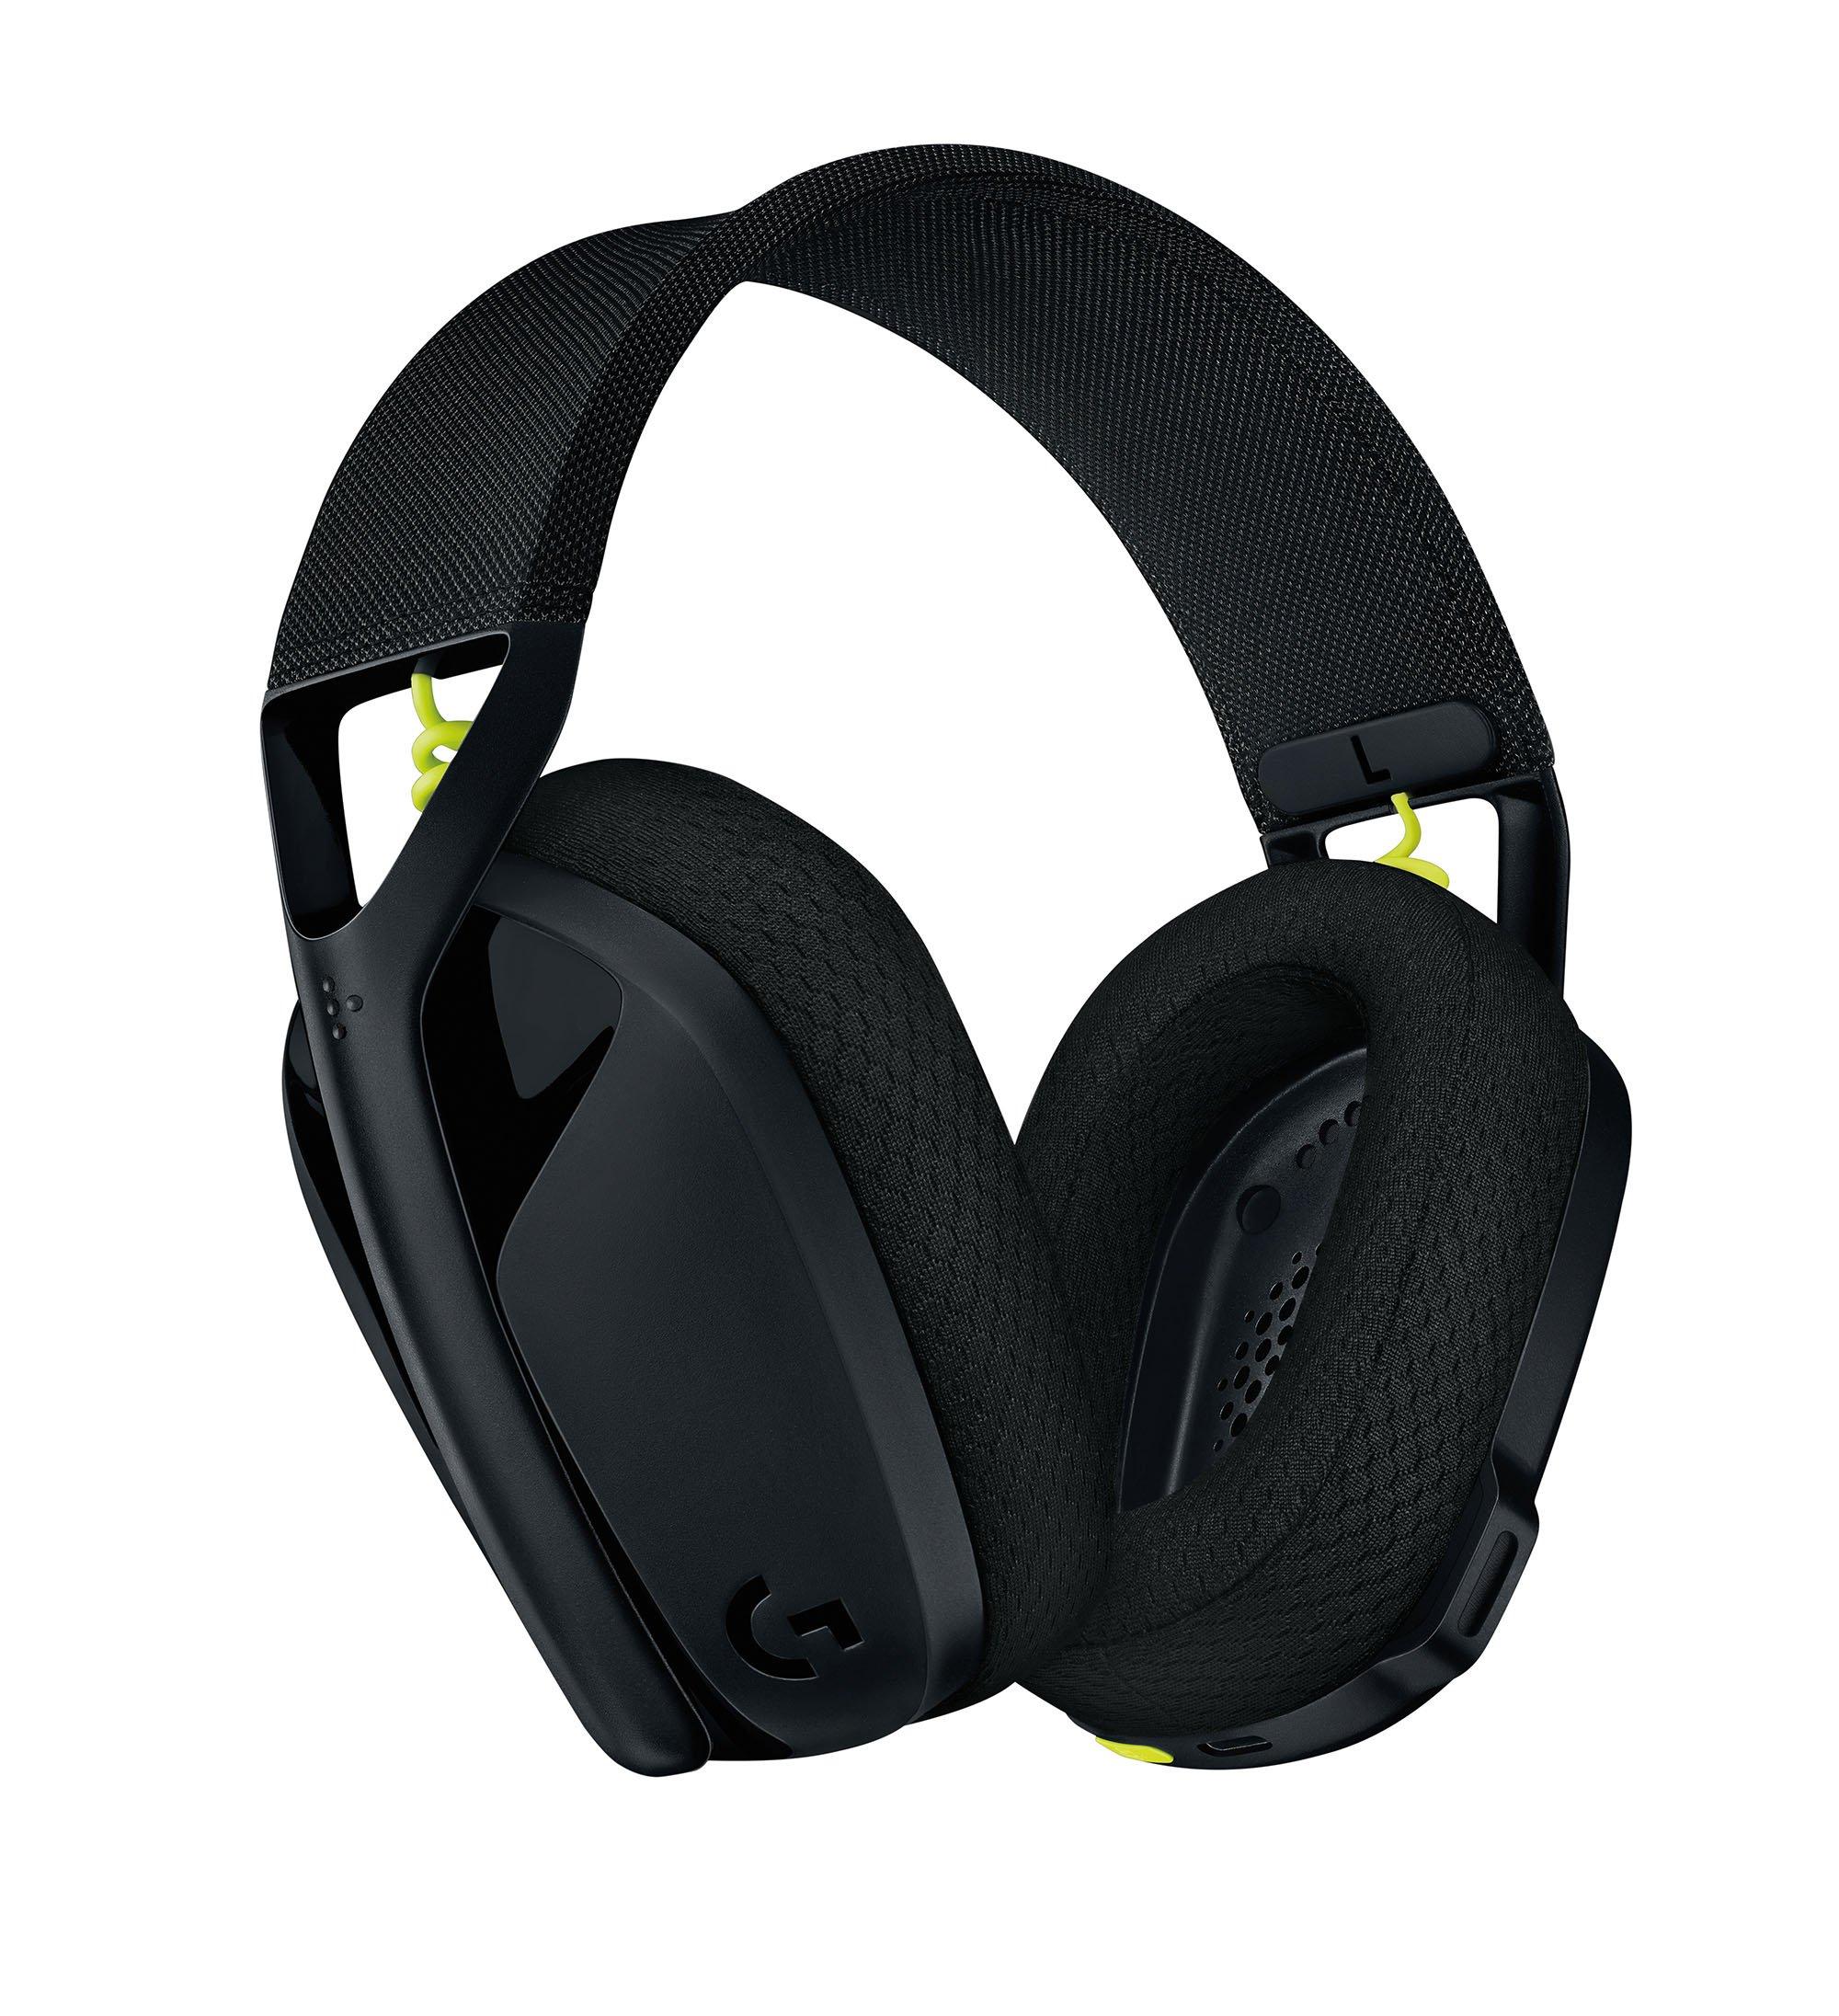 list item 5 of 6 Logitech G435 Wireless Gaming Headset for PC